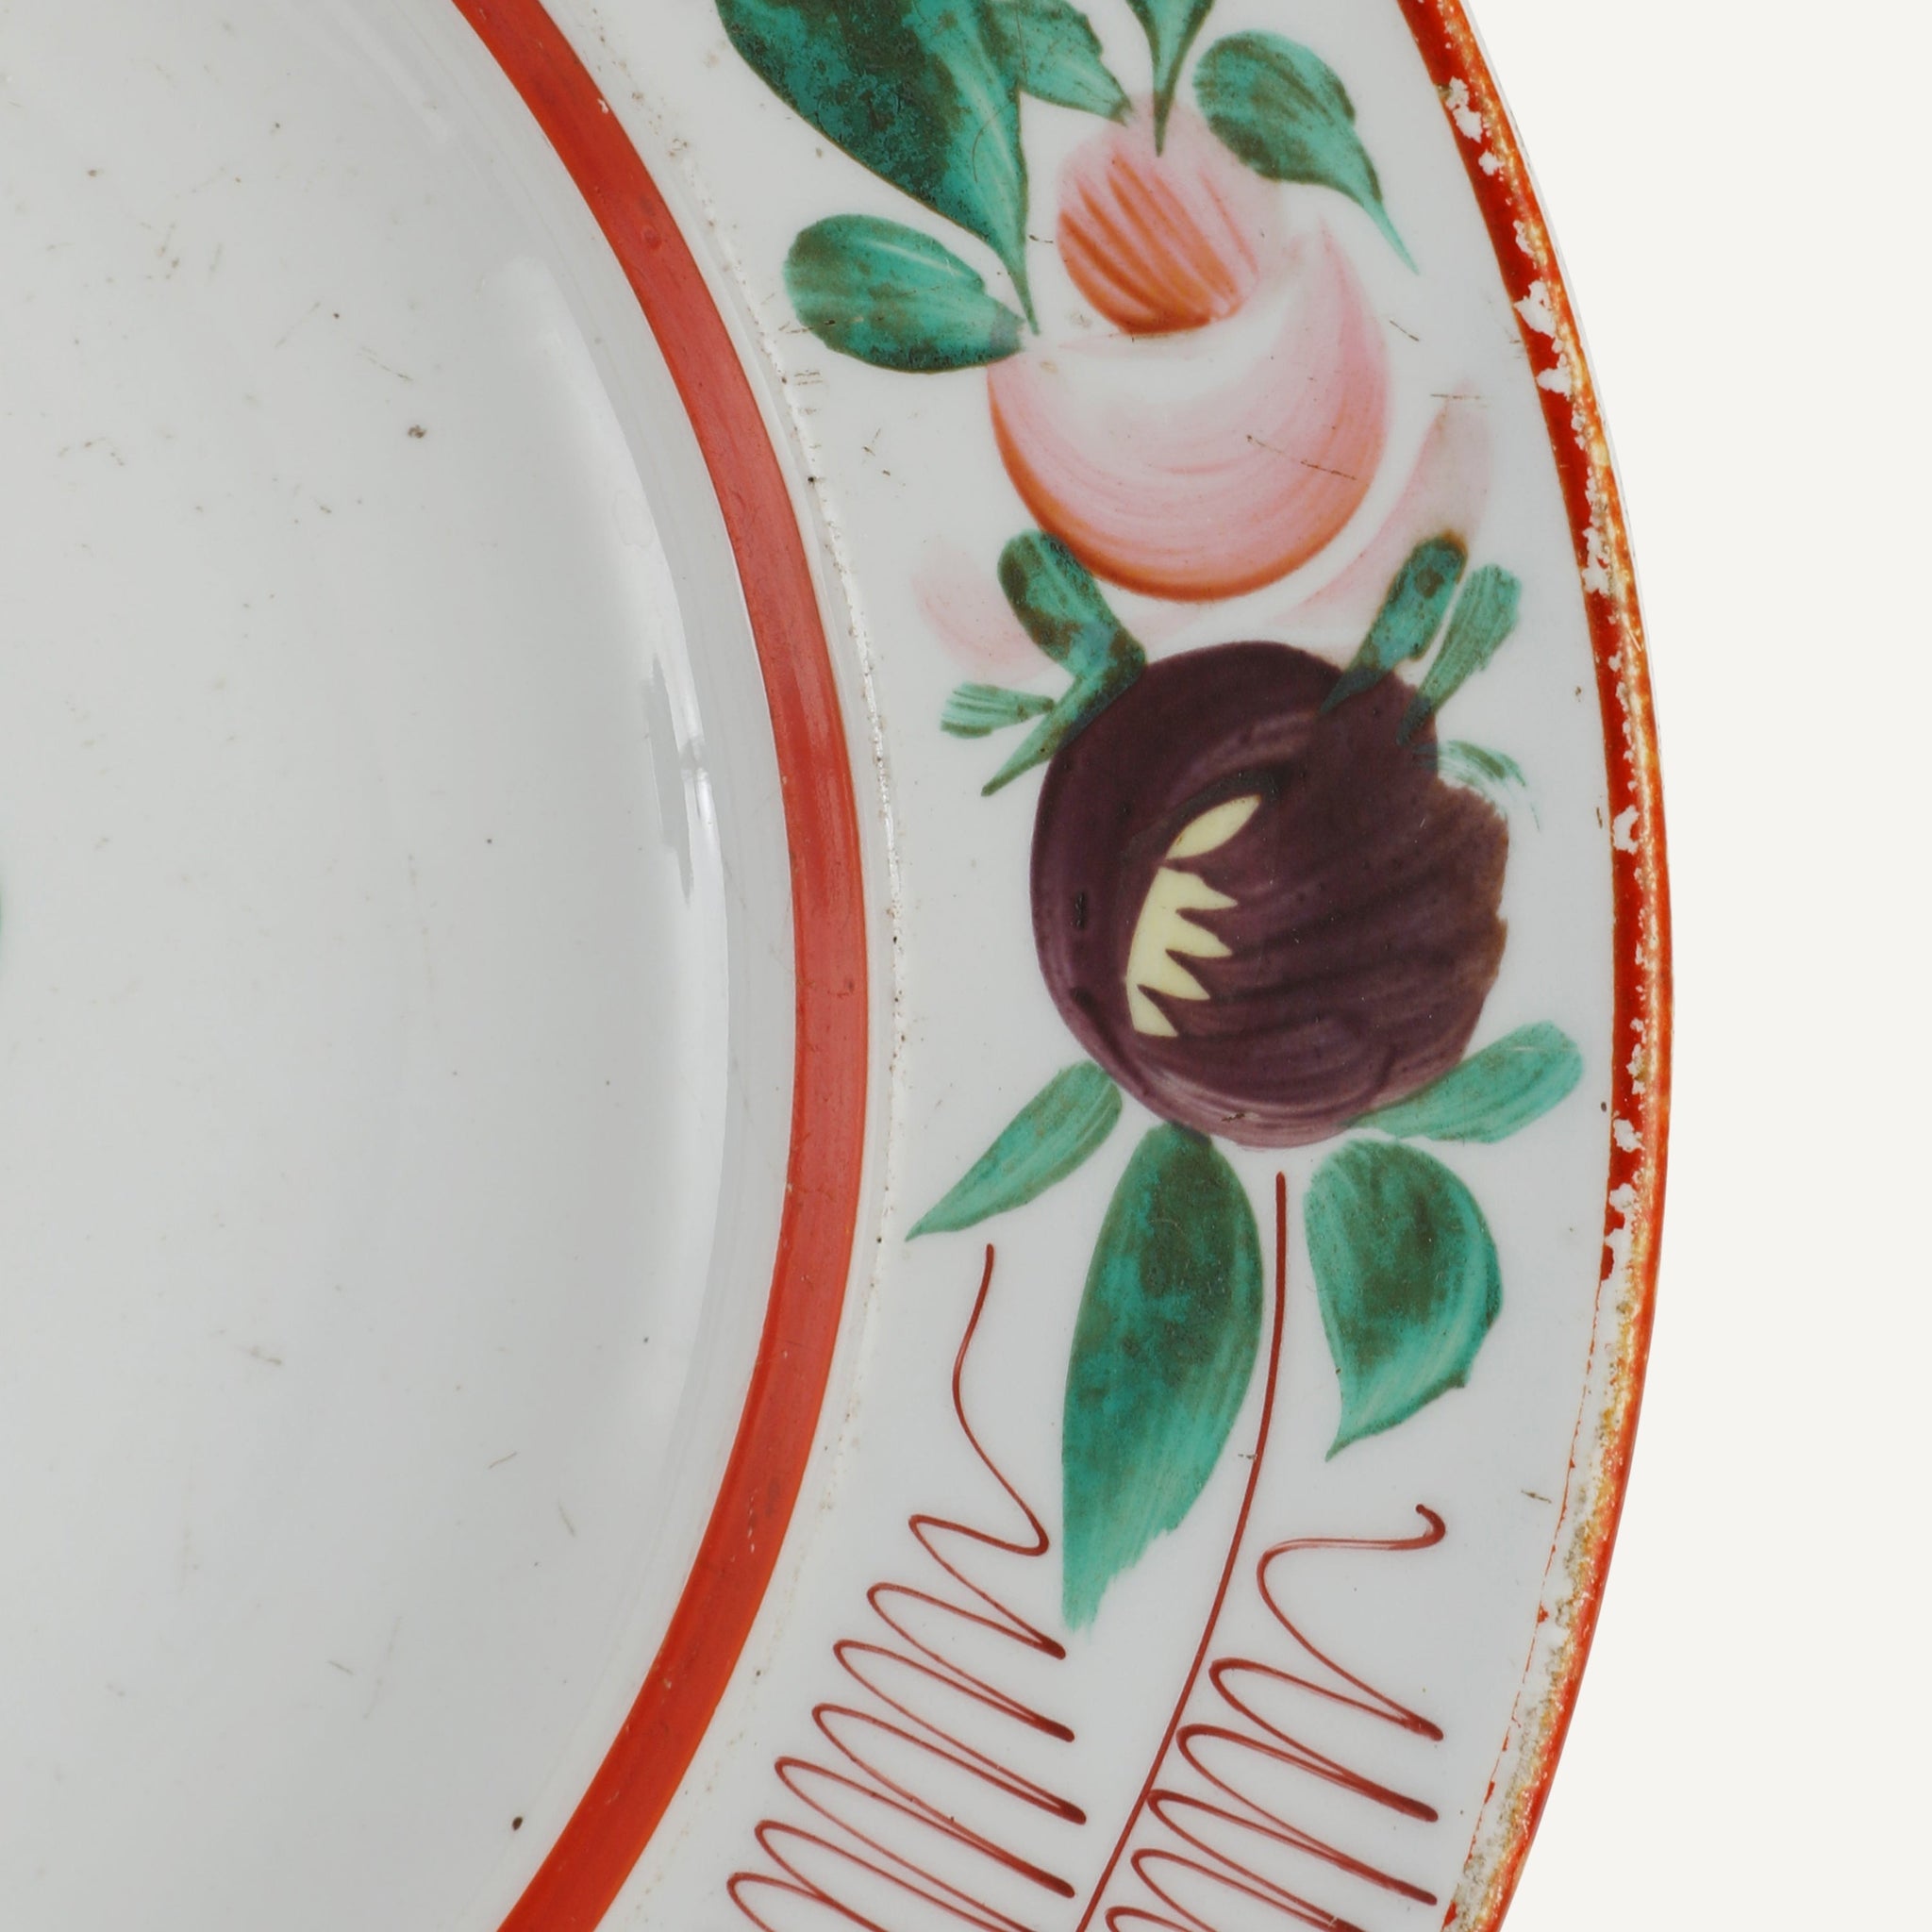 VINTAGE HAND PAINTED WALL PLATE